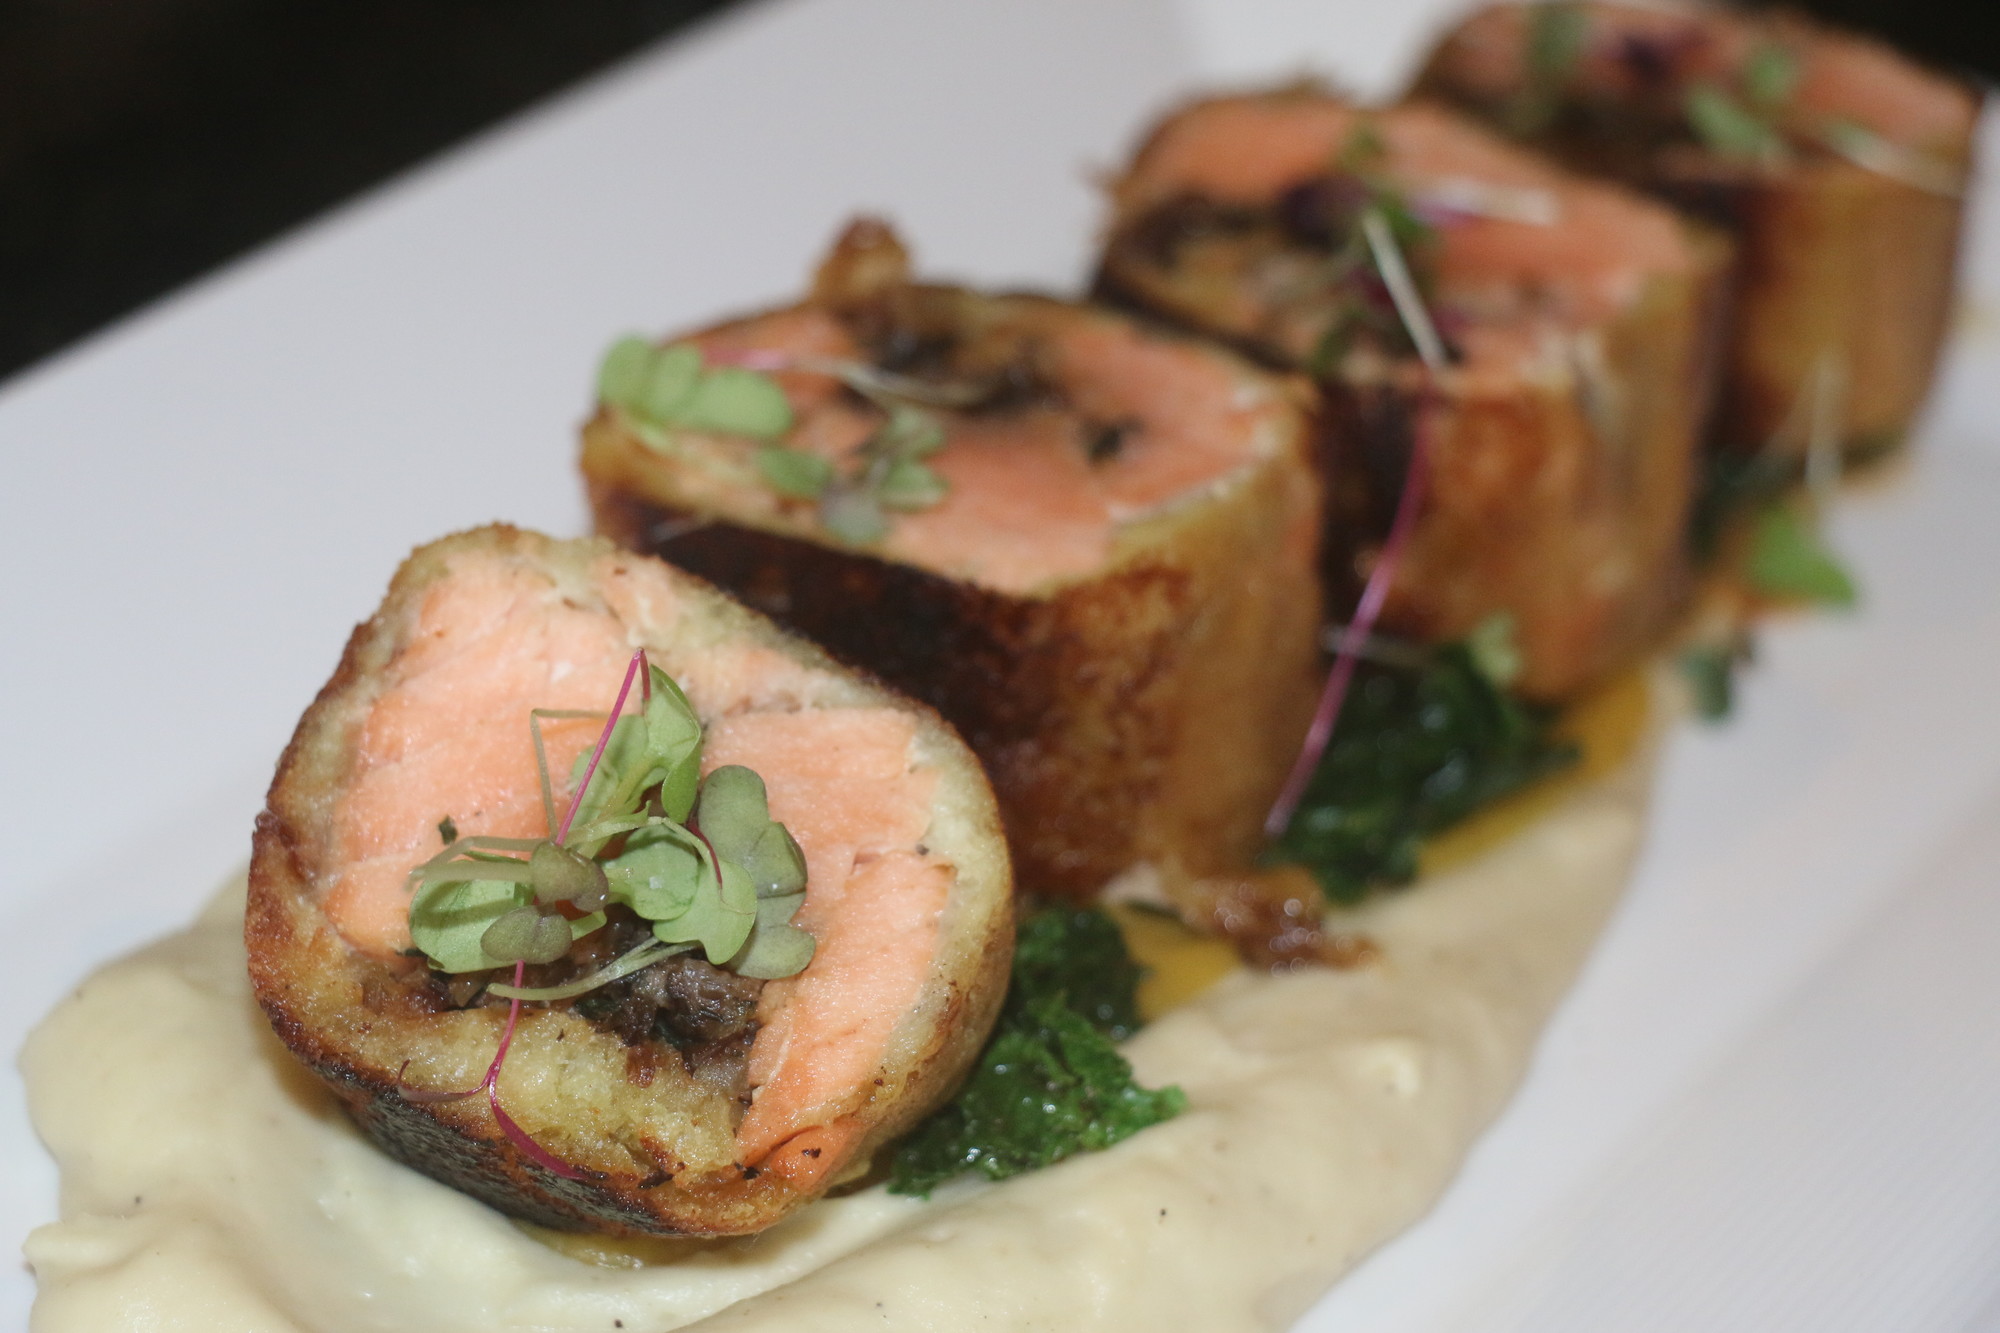 Brioche-wrapped salmon and wild mushrooms glazed with honey Dijon mustard is one of Jallad’s signature dishes.